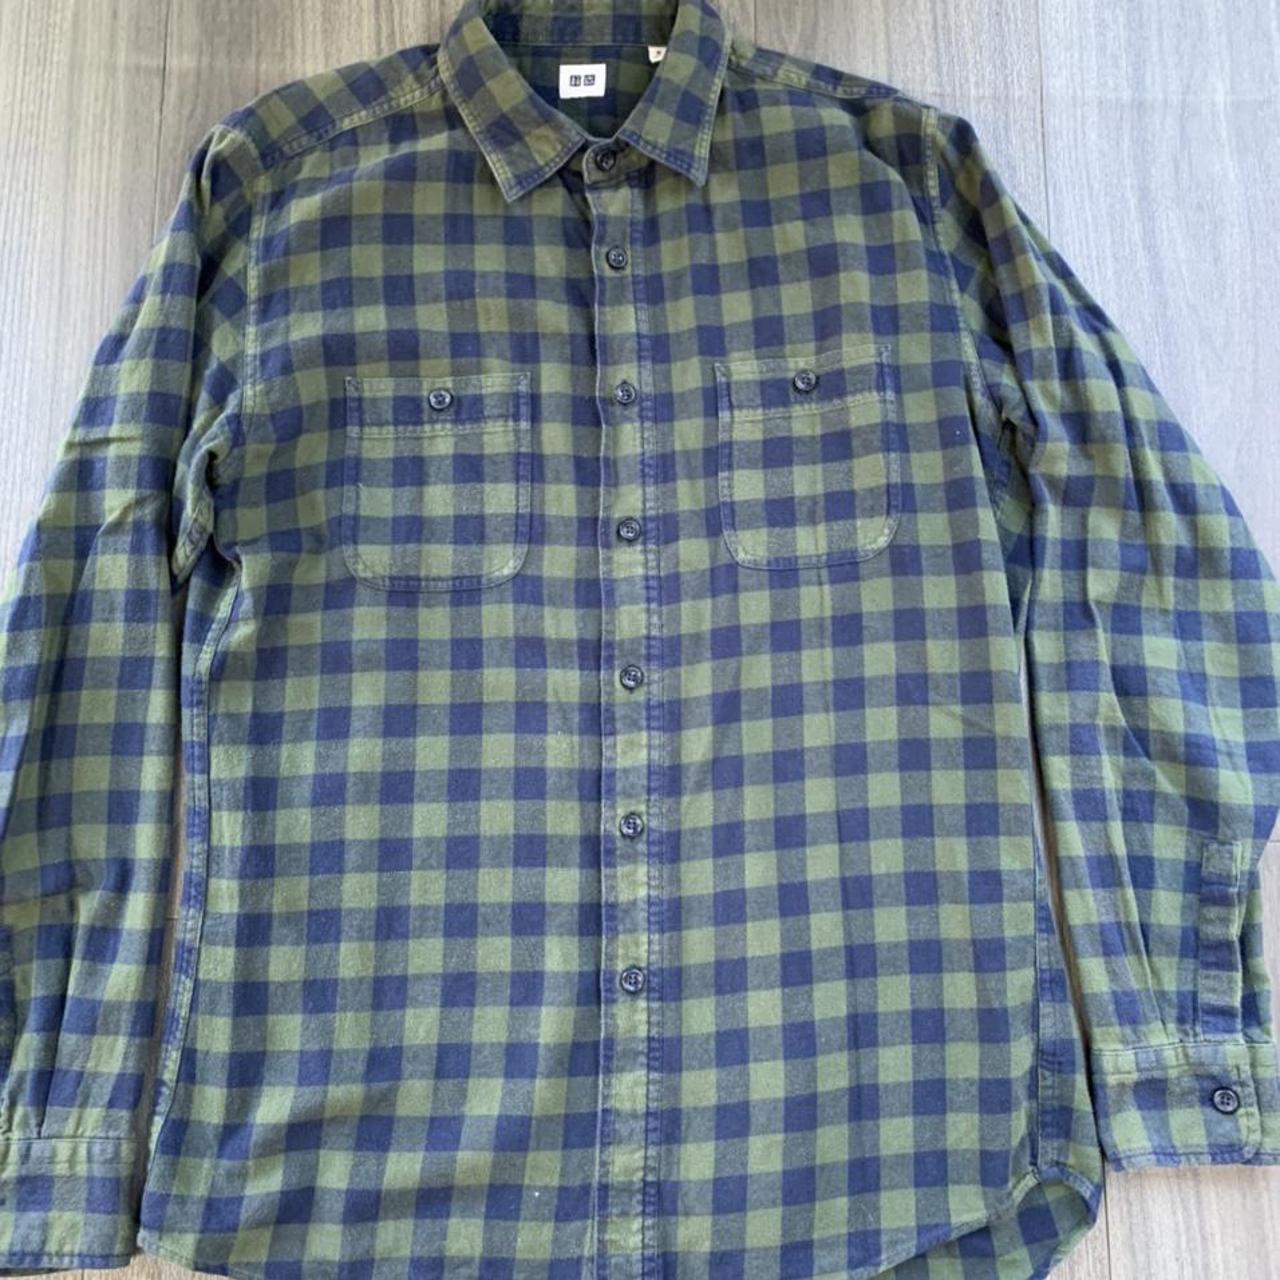 Uniqlo checkered green and blue shirt top, mens size... - Depop